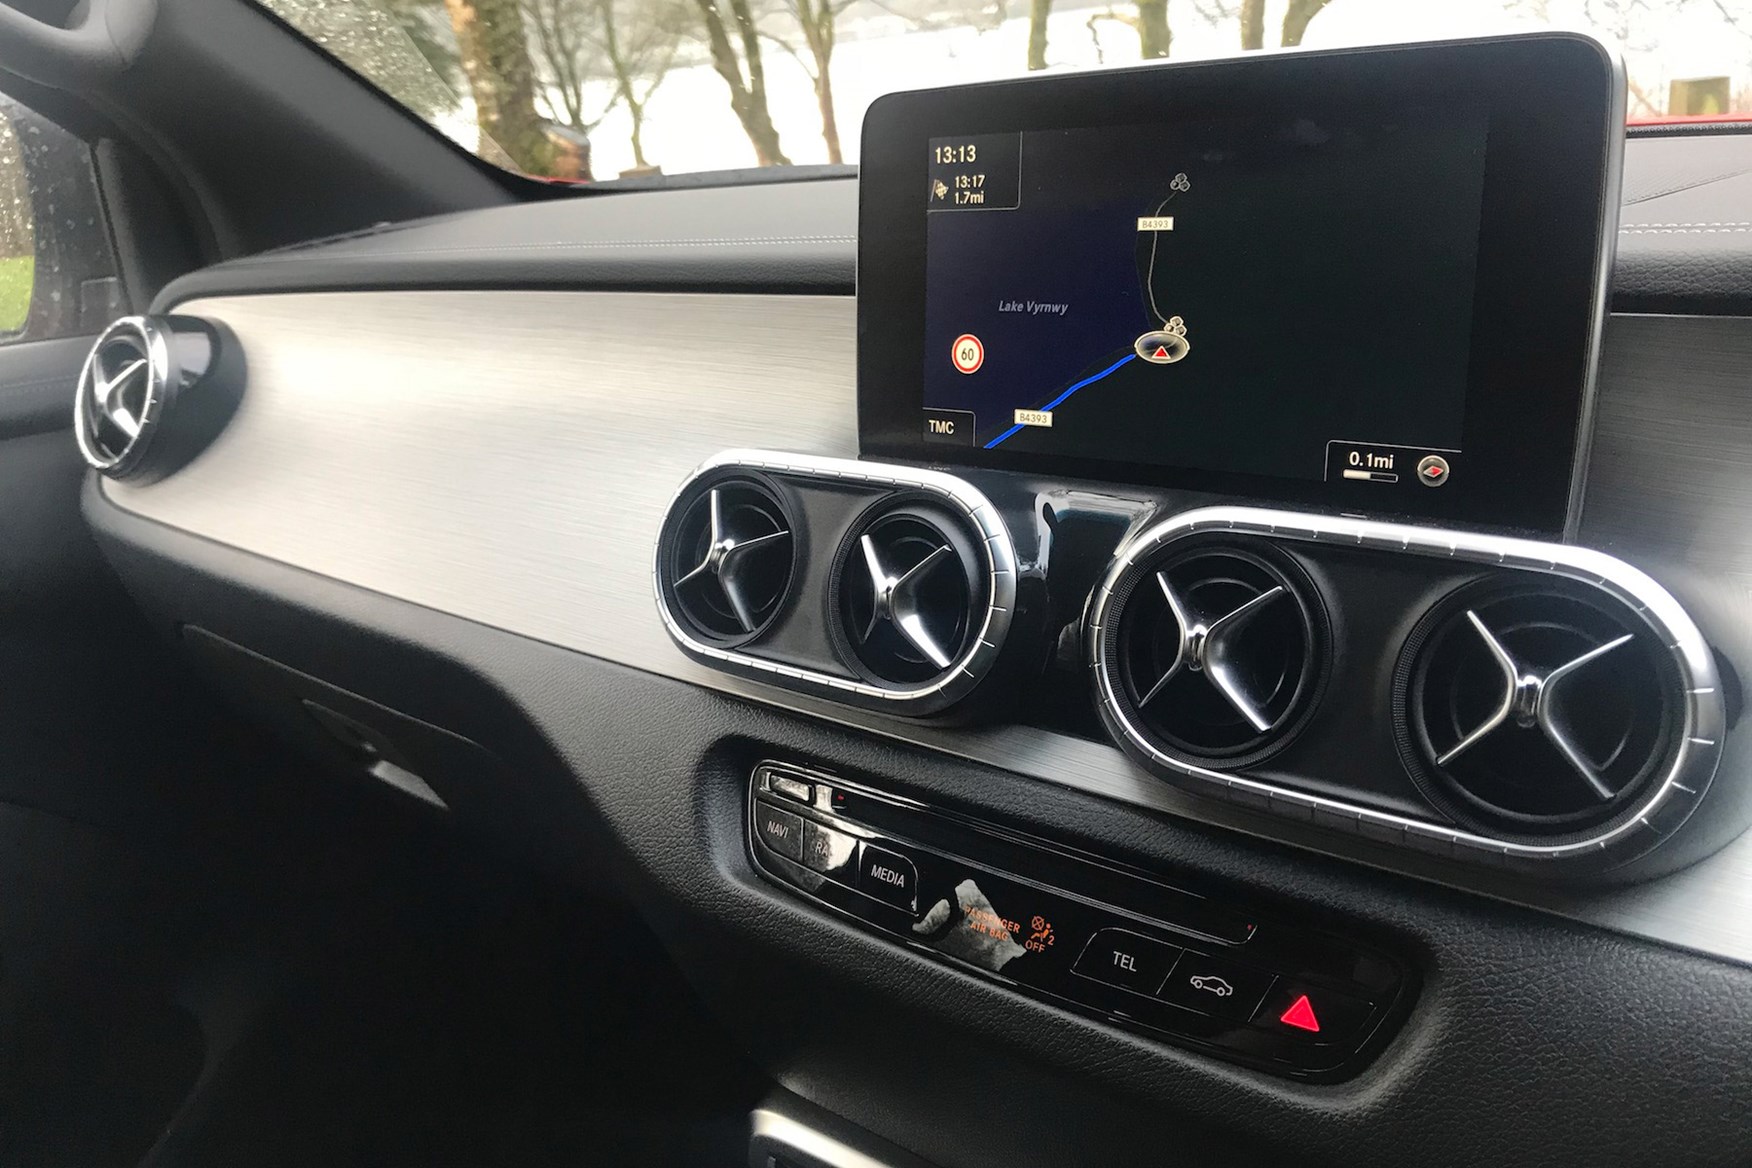 Mercedes-Benz X-Class full review on Parkers Vans - cabin detail